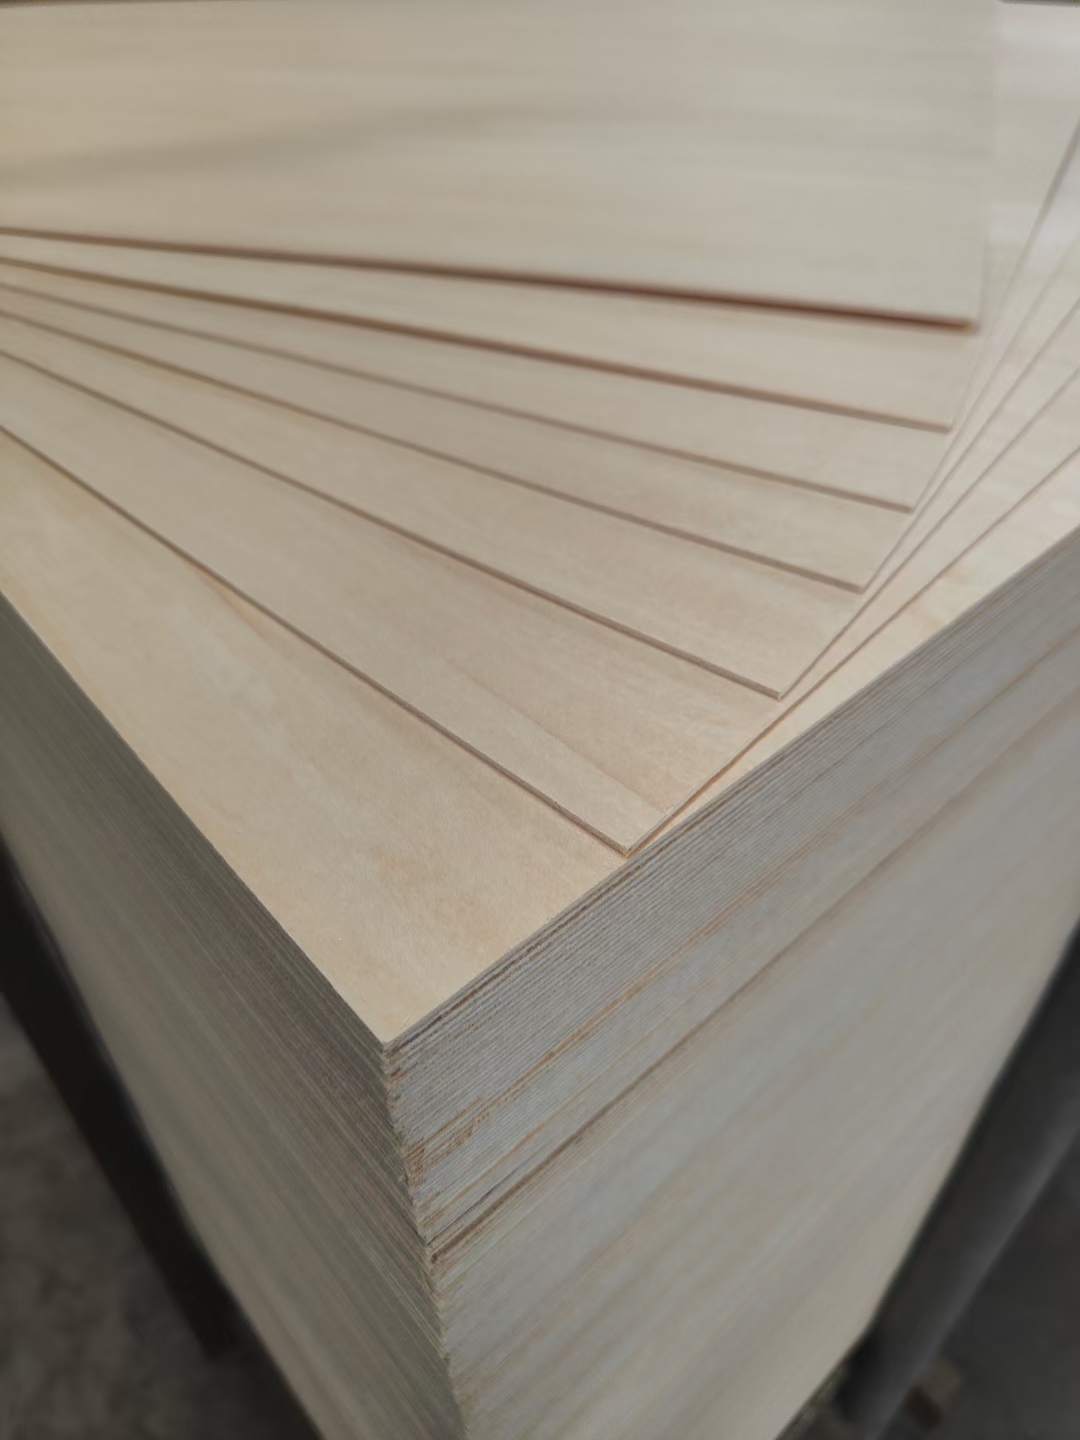 New product-Basswood plywood for laser cutting toys and craft(图2)